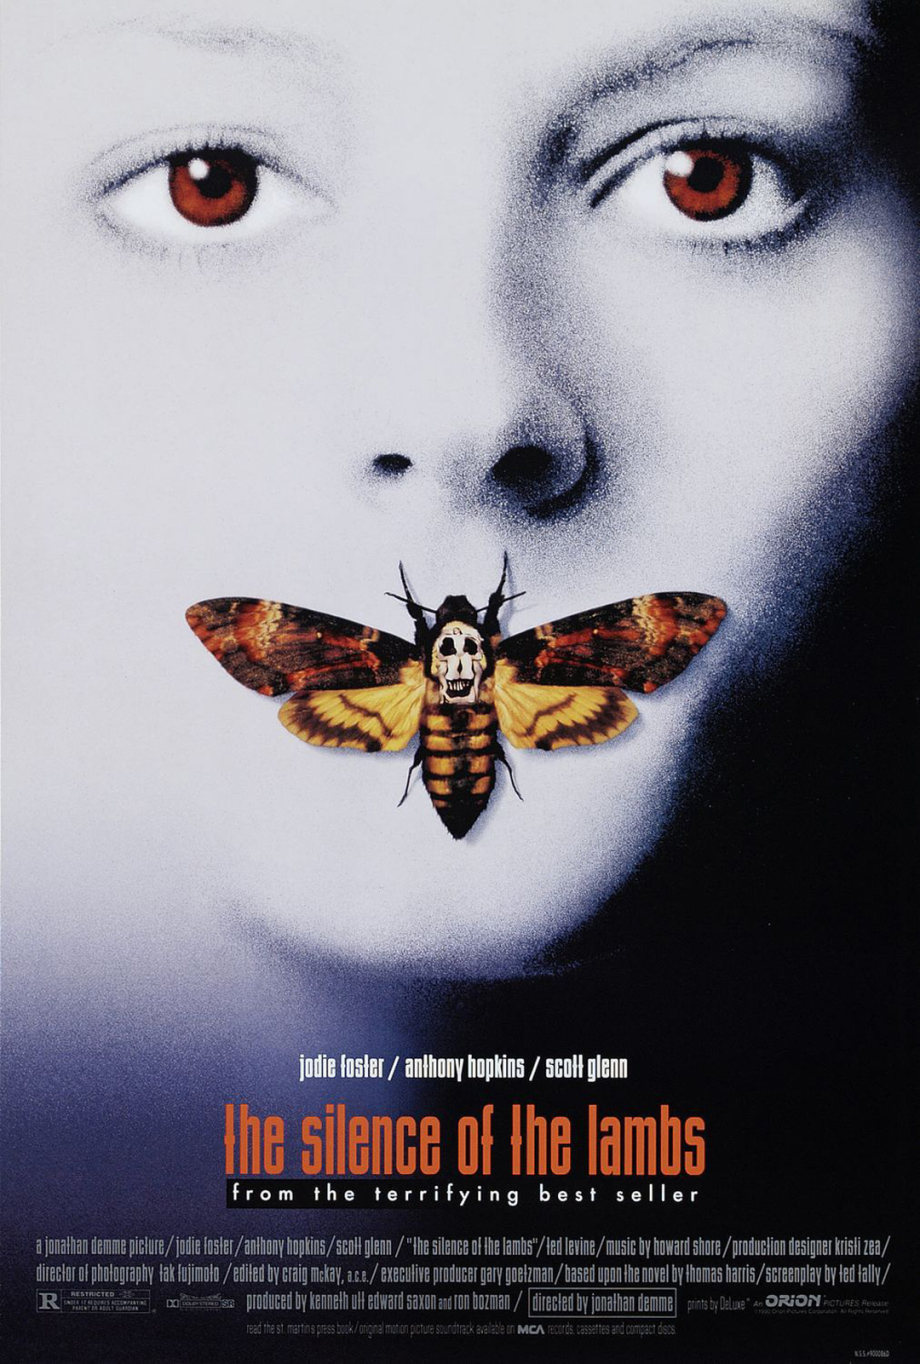 1991: The Silence of the Lambs — 8.6